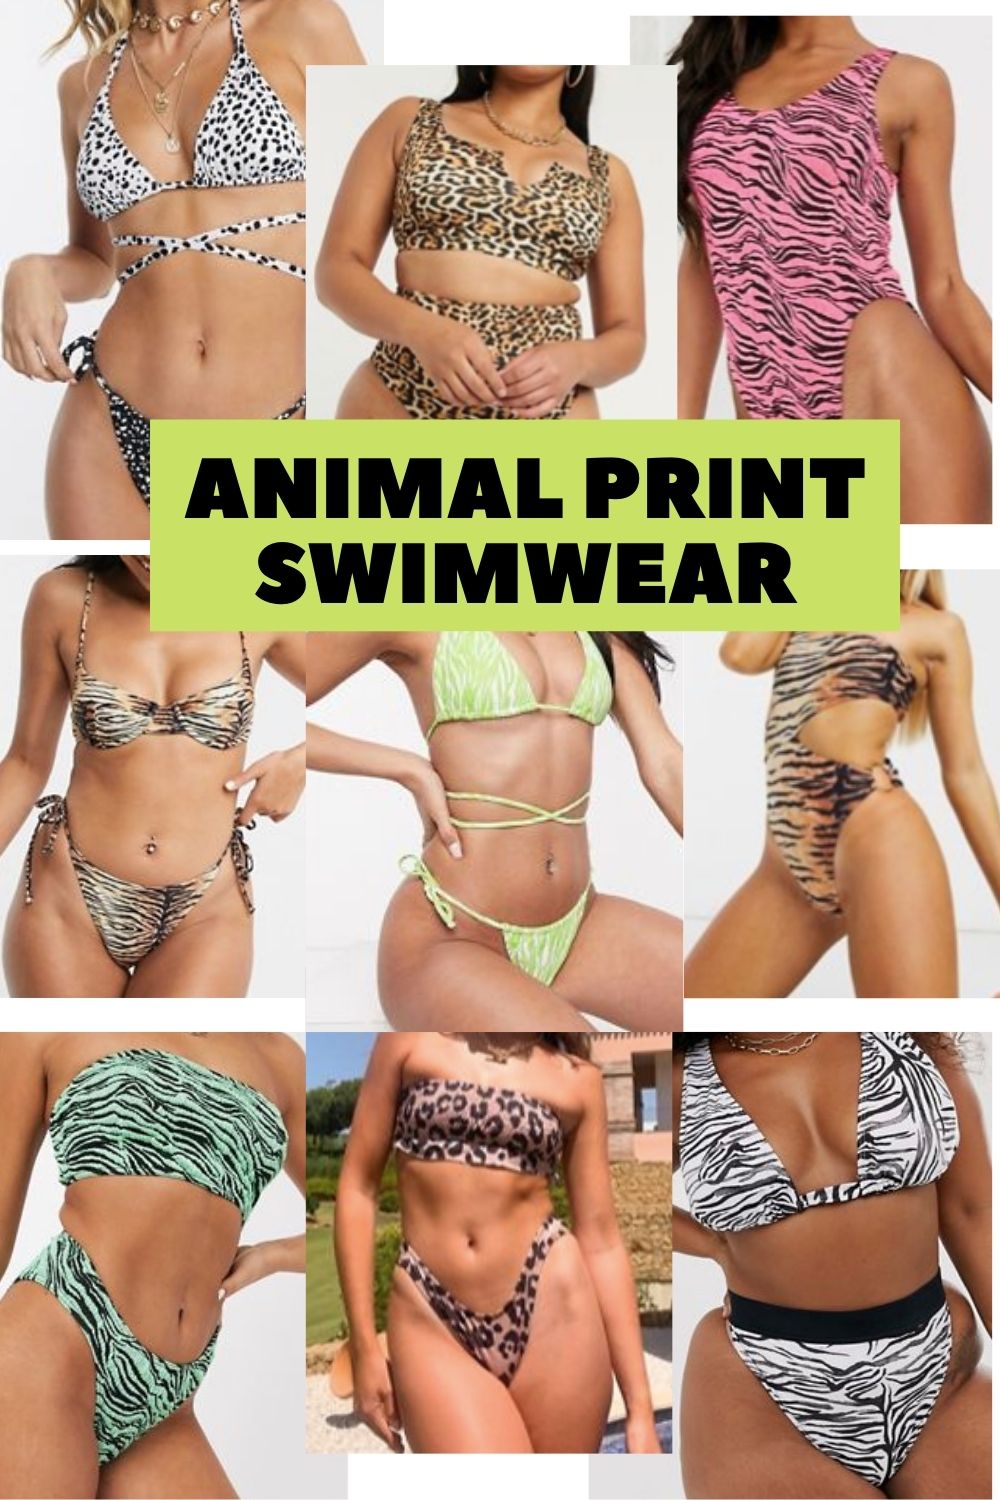 pictures of animal print swimwear in a collage